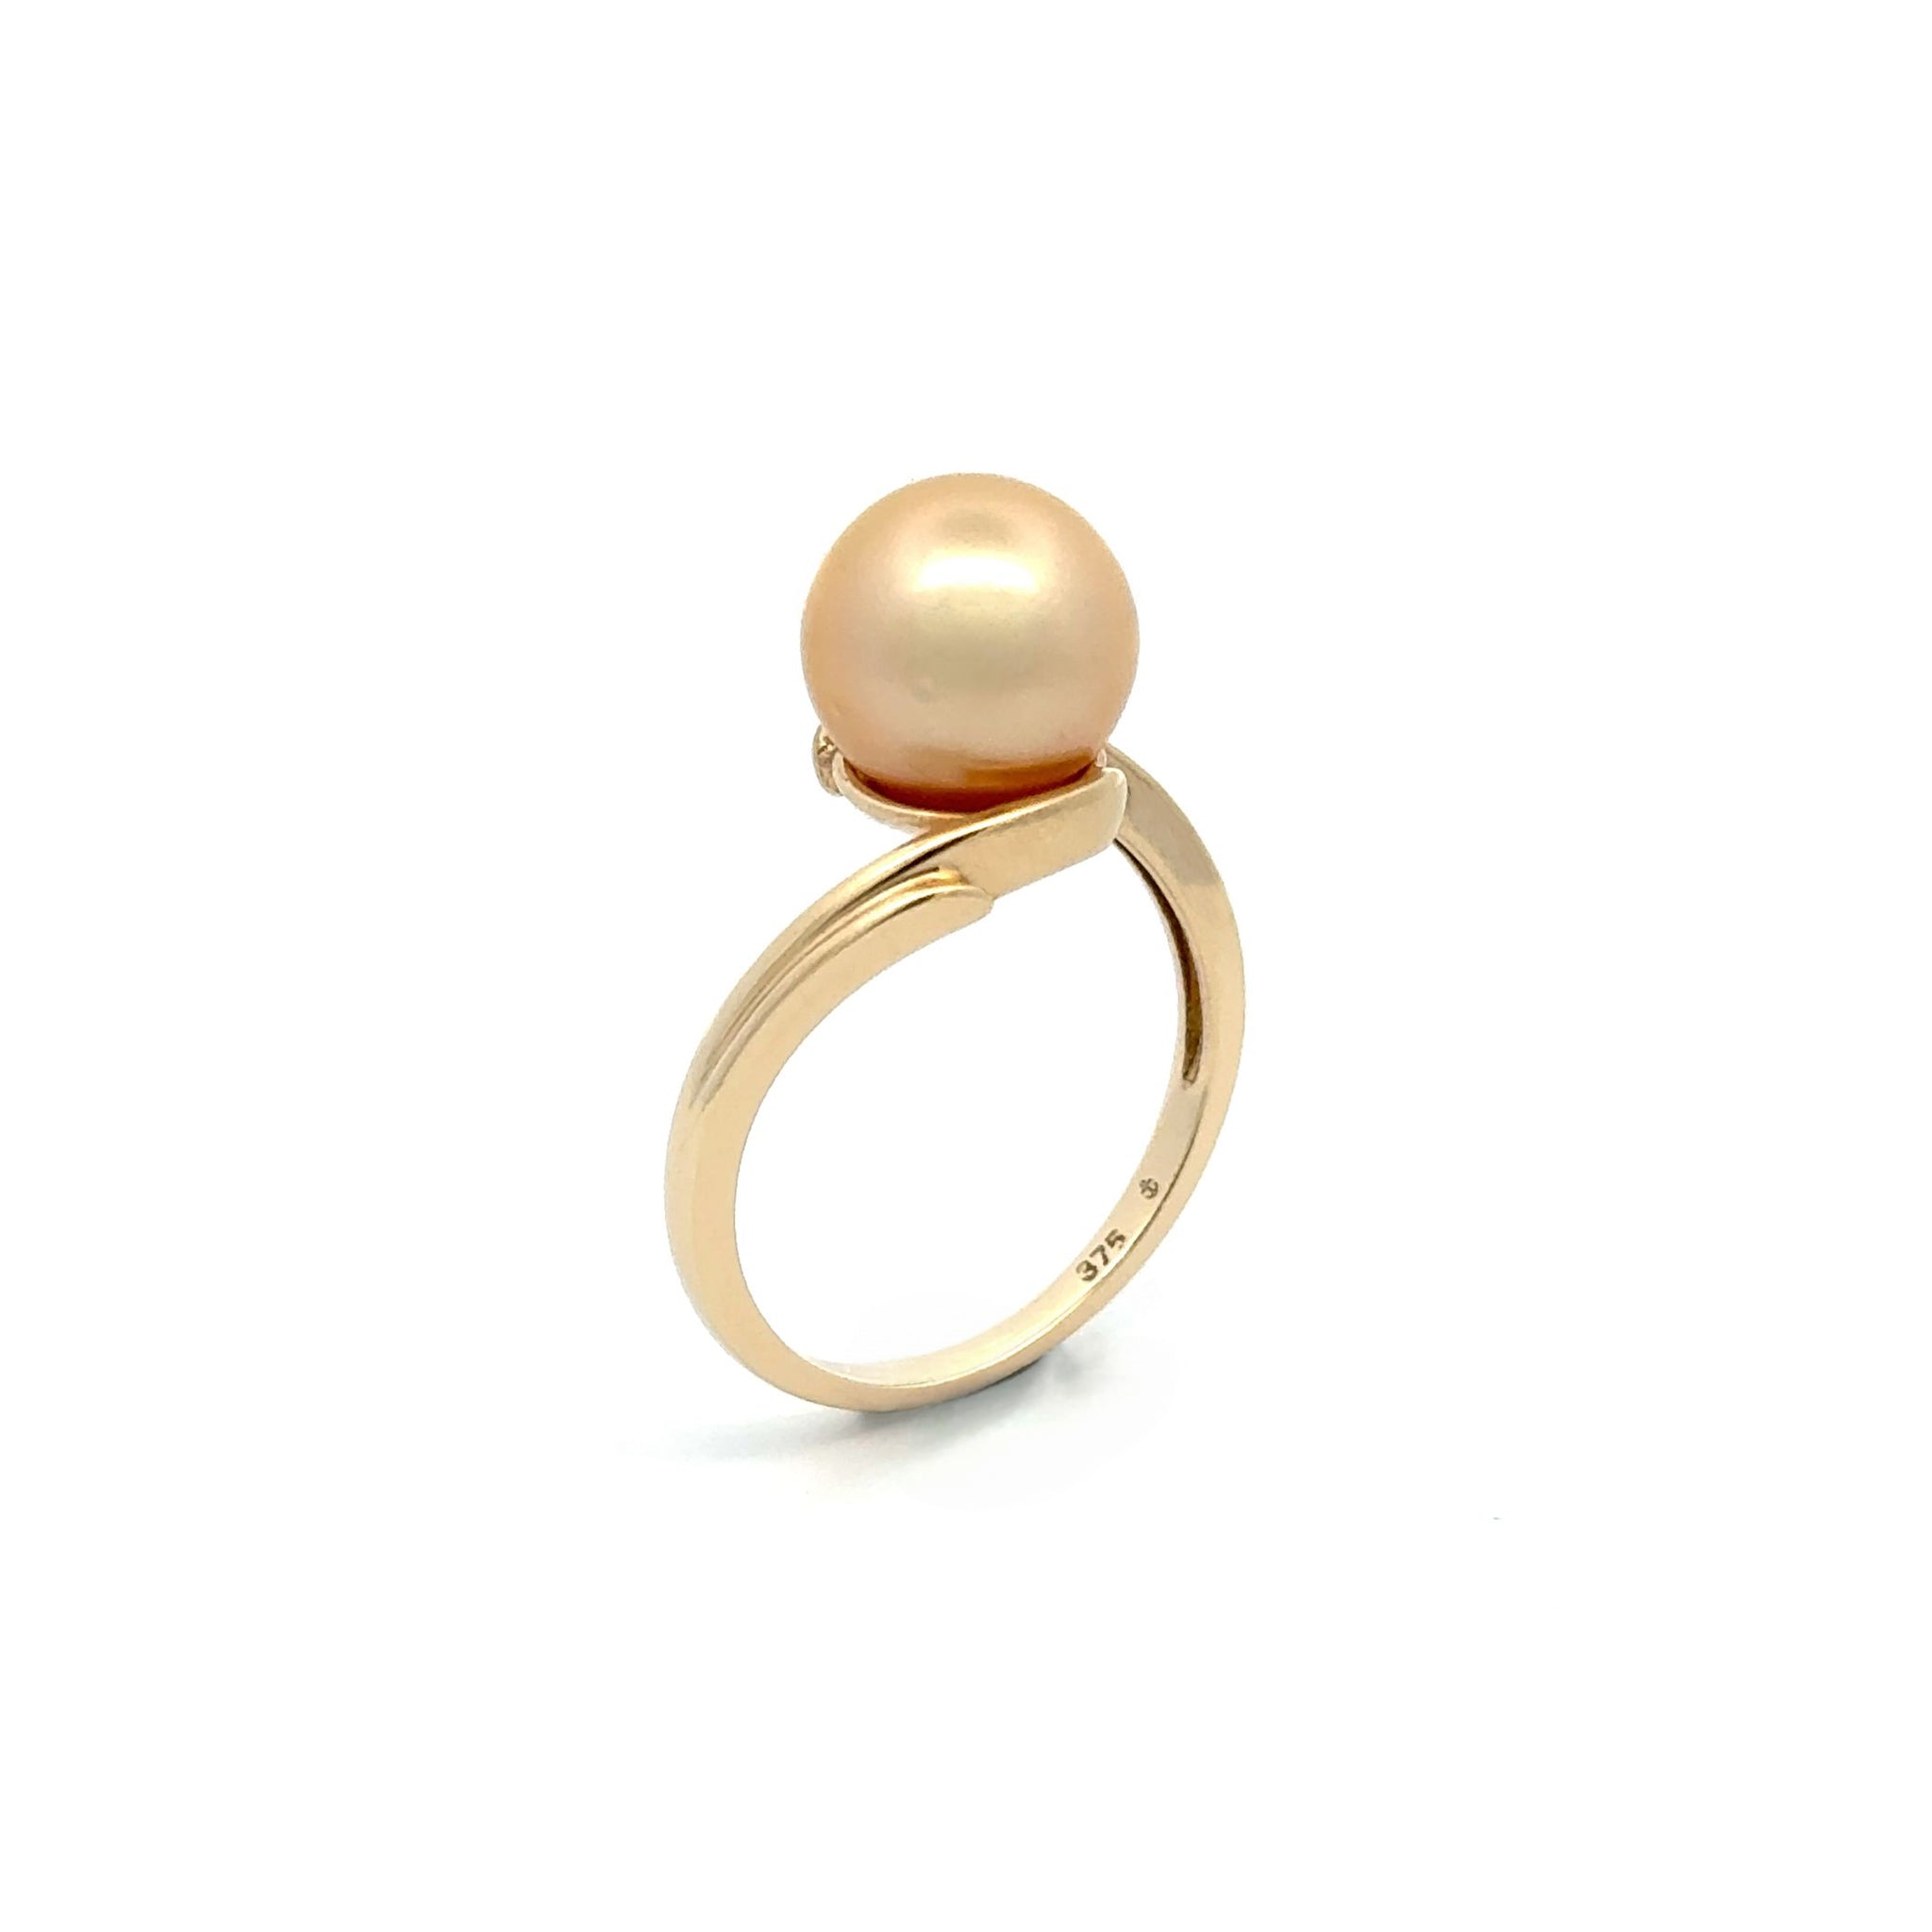 9K Yellow Gold South Sea Cultured 9 - 10mm Pearl Ring